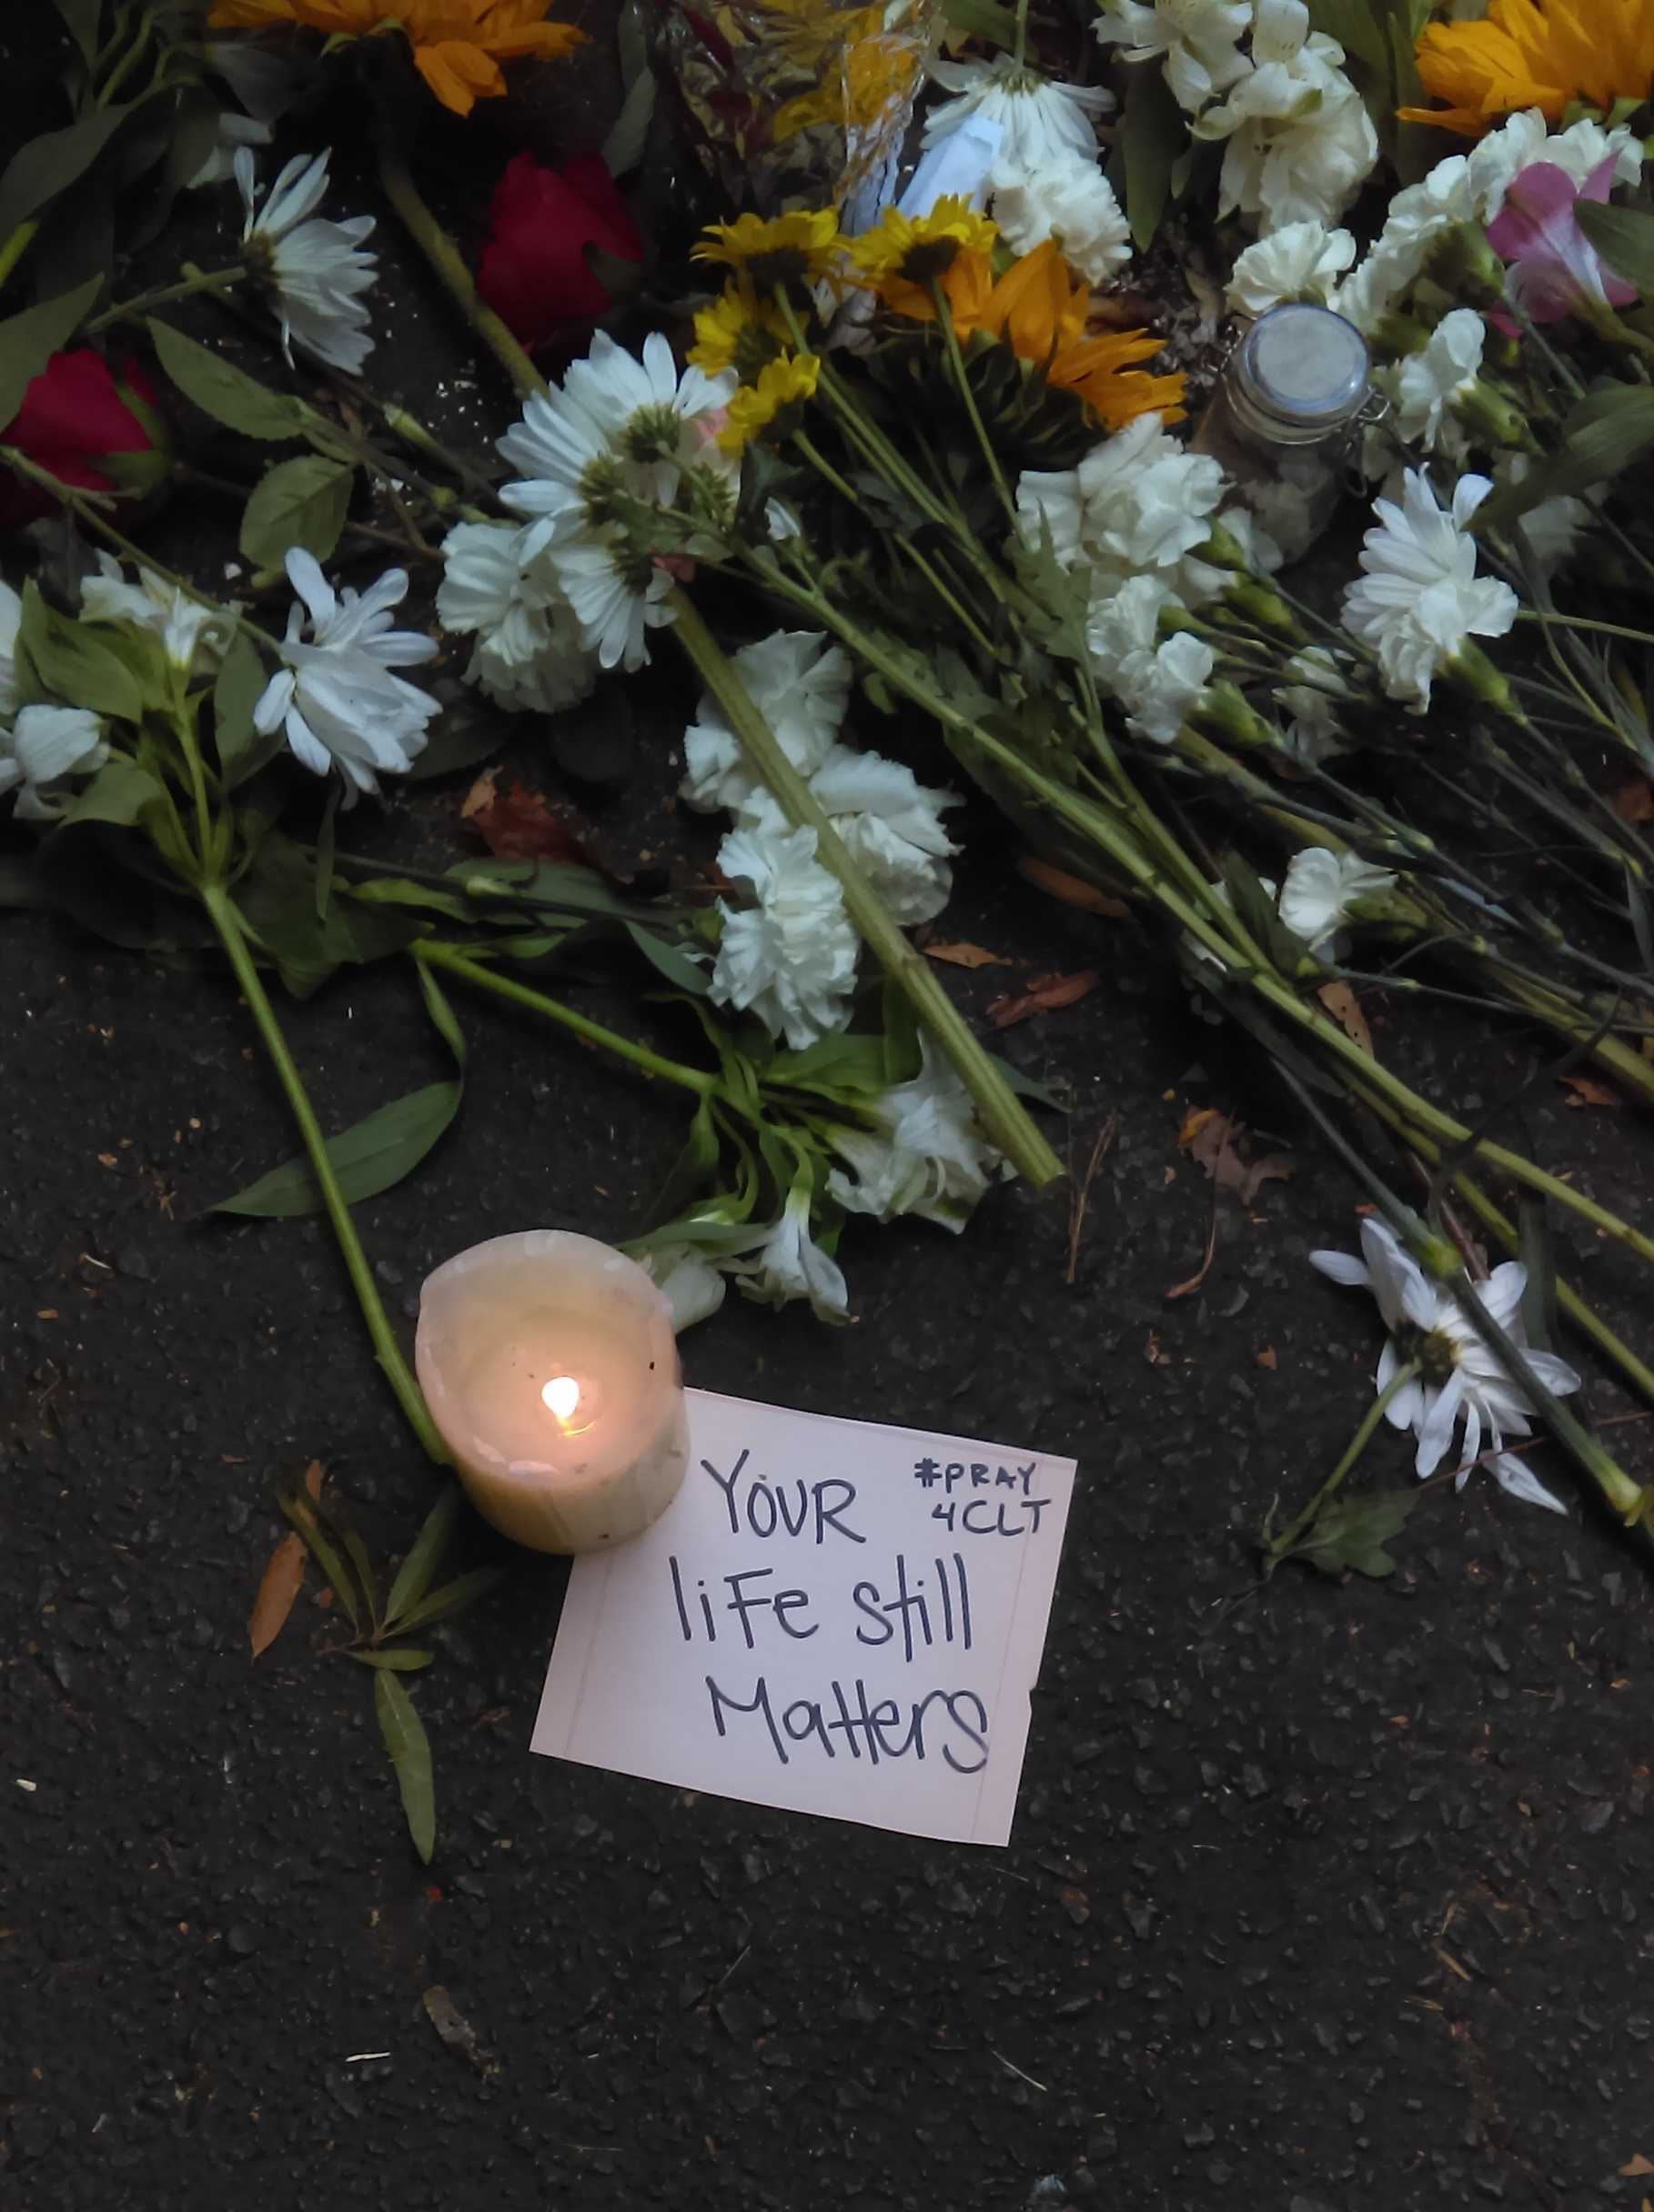 People left flowers and messages near the site where Keith Lamont Scott was killed. Courtesy of Gabe Pollack